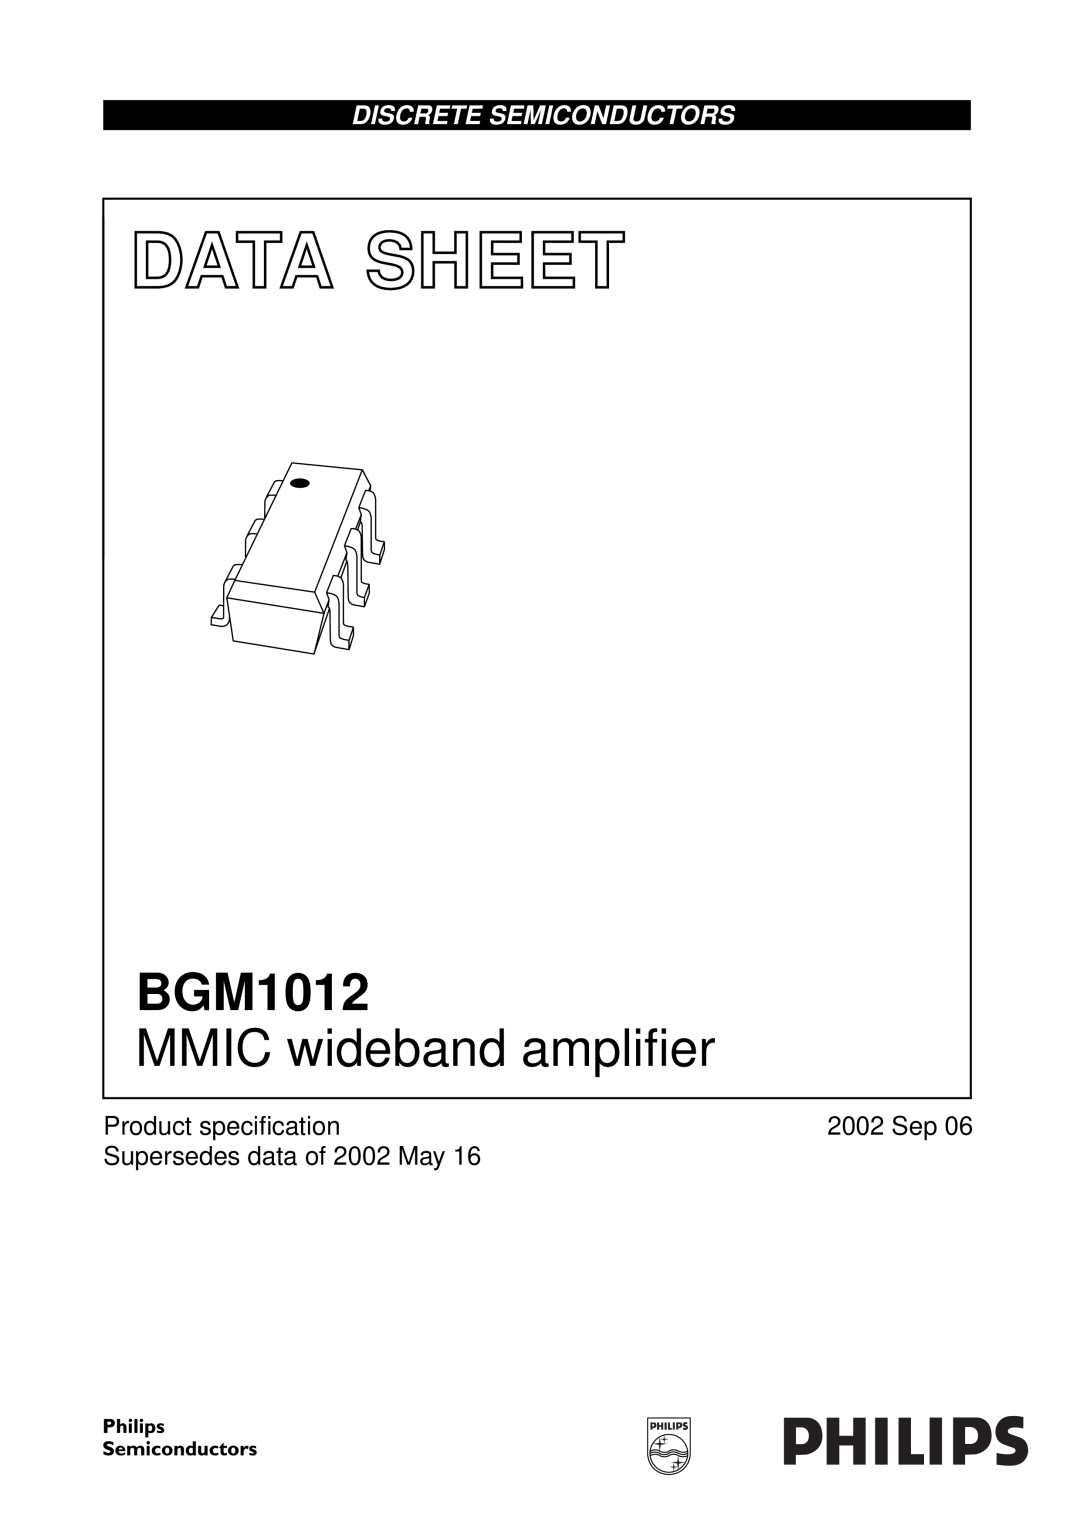 Philips BGM1012 specifications Product speciﬁcation, Supersedes data of 2002 May, 2002 Sep, Data Sheet, book, halfpage 